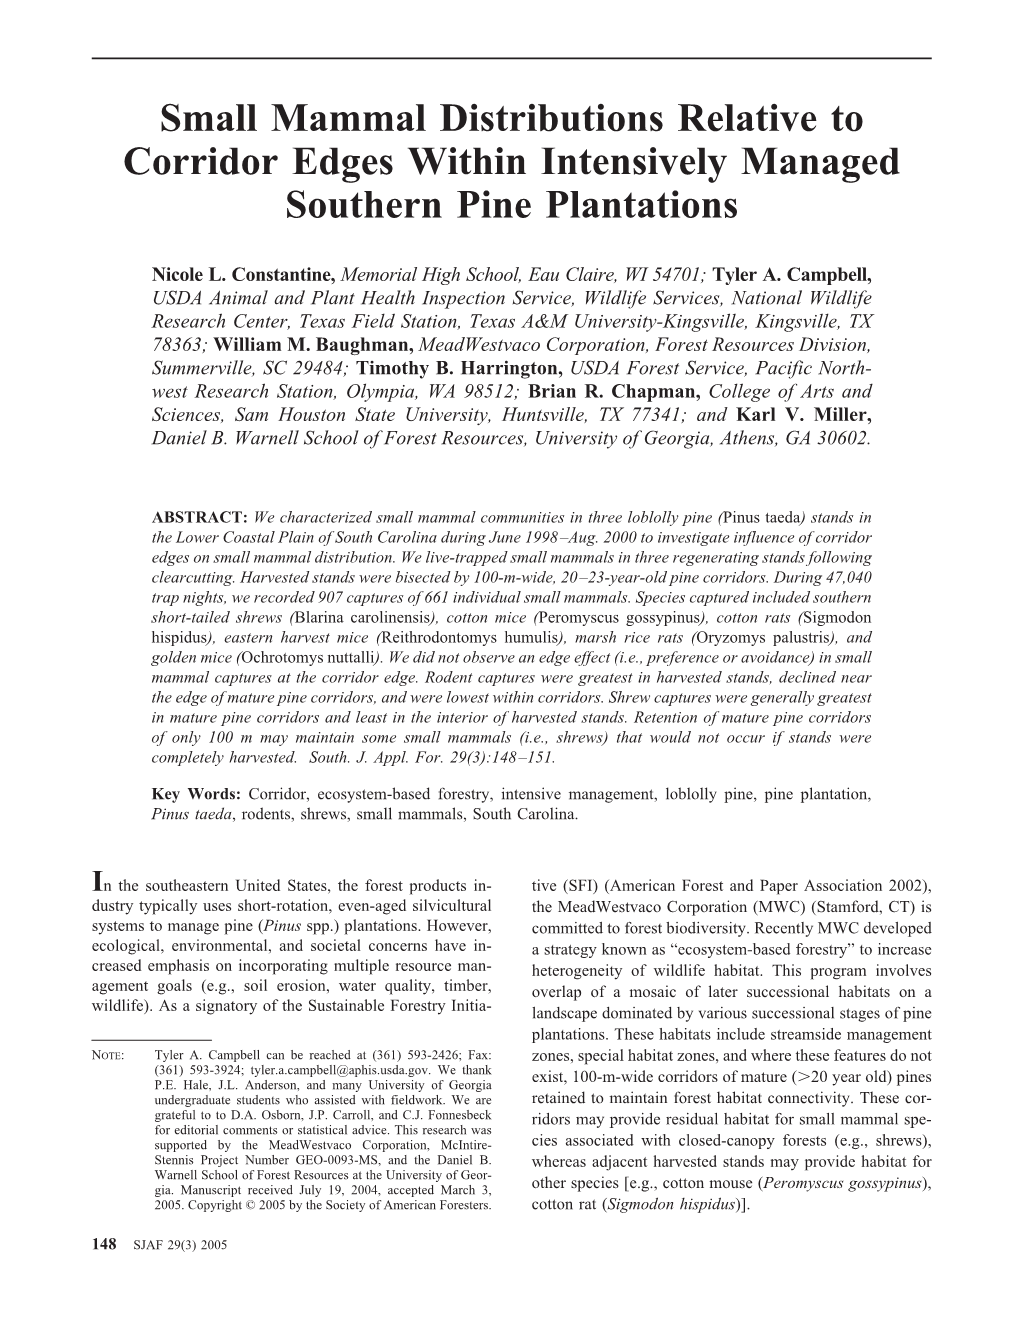 Small Mammal Distributions Relative to Corridor Edges Within Intensively Managed Southern Pine Plantations